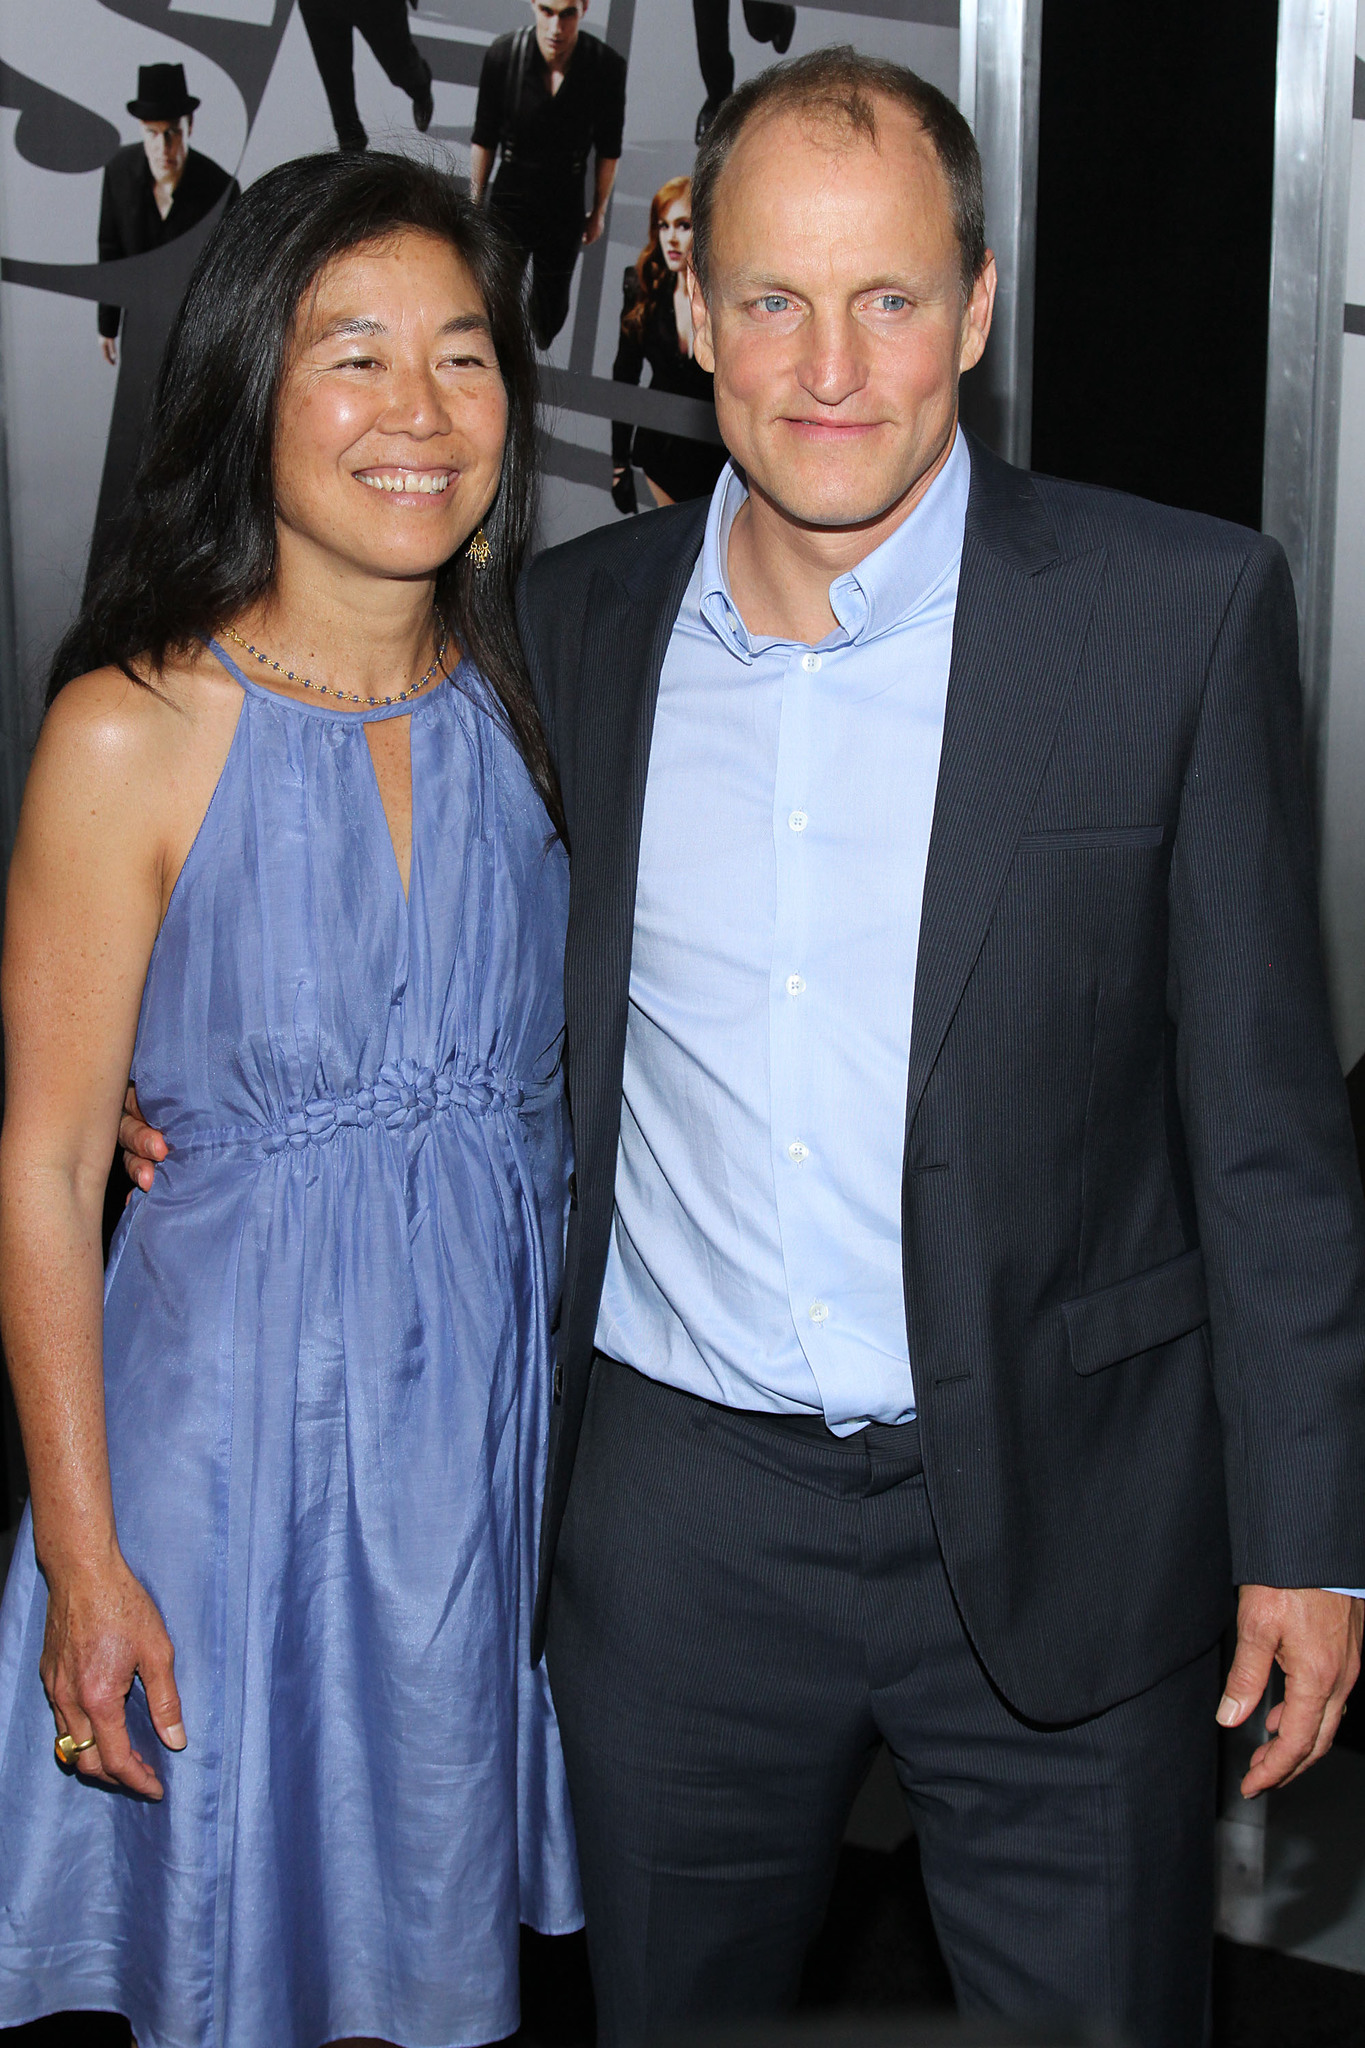 Woody Harrelson and Laura Louie at event of Apgaules meistrai (2013)